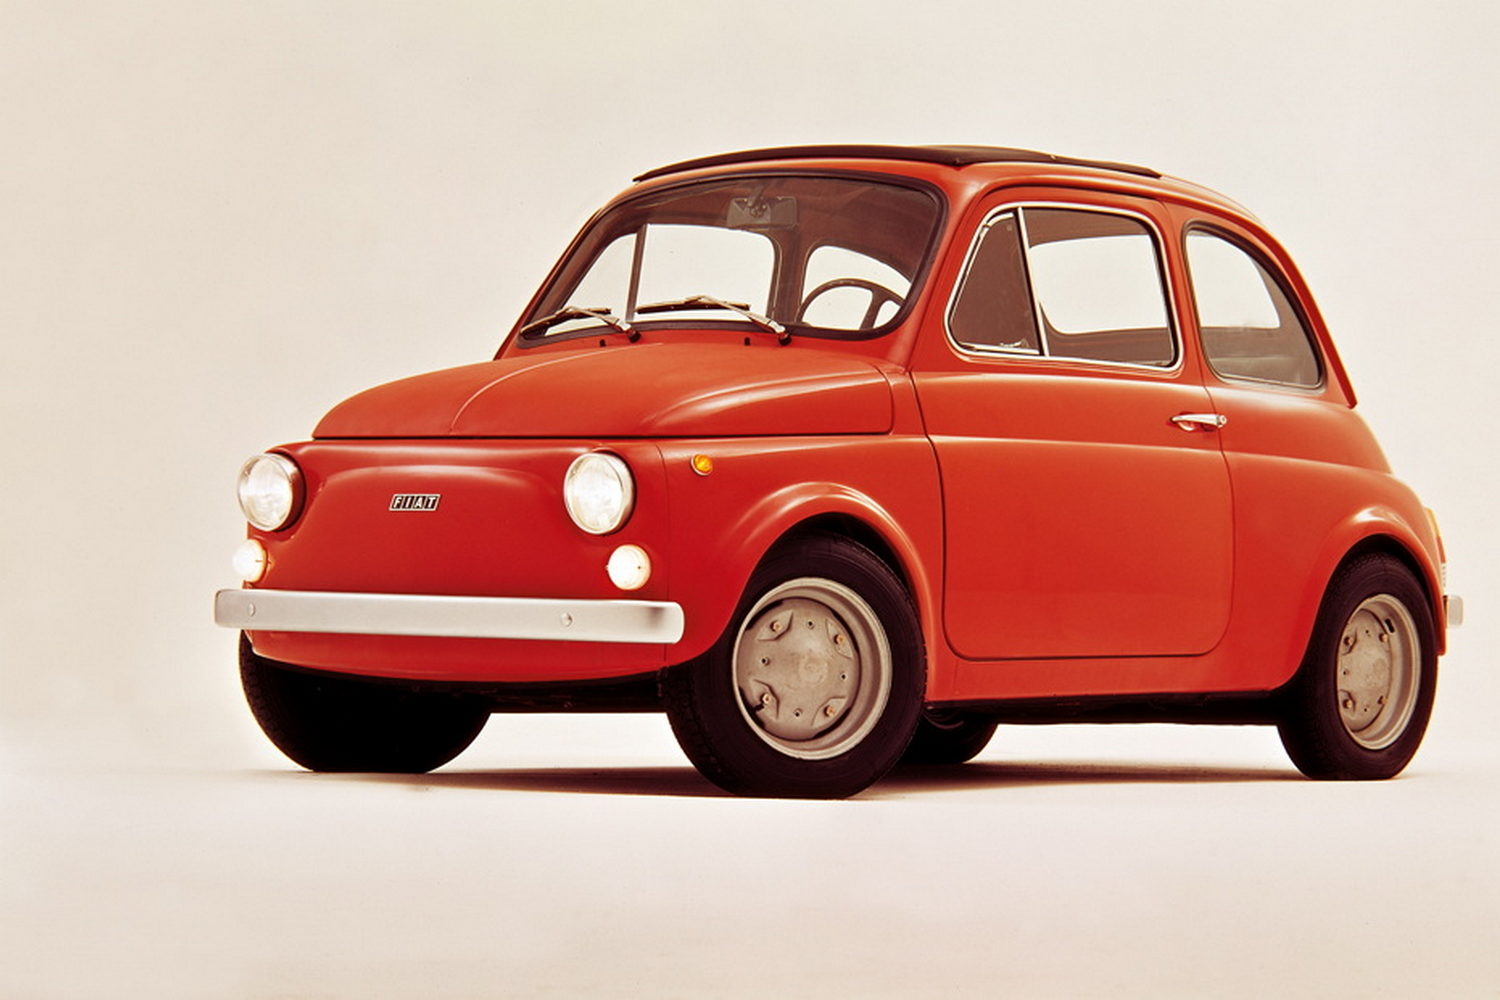 Complete Car Features | Fiat 500 - the history of Italy's greatest car